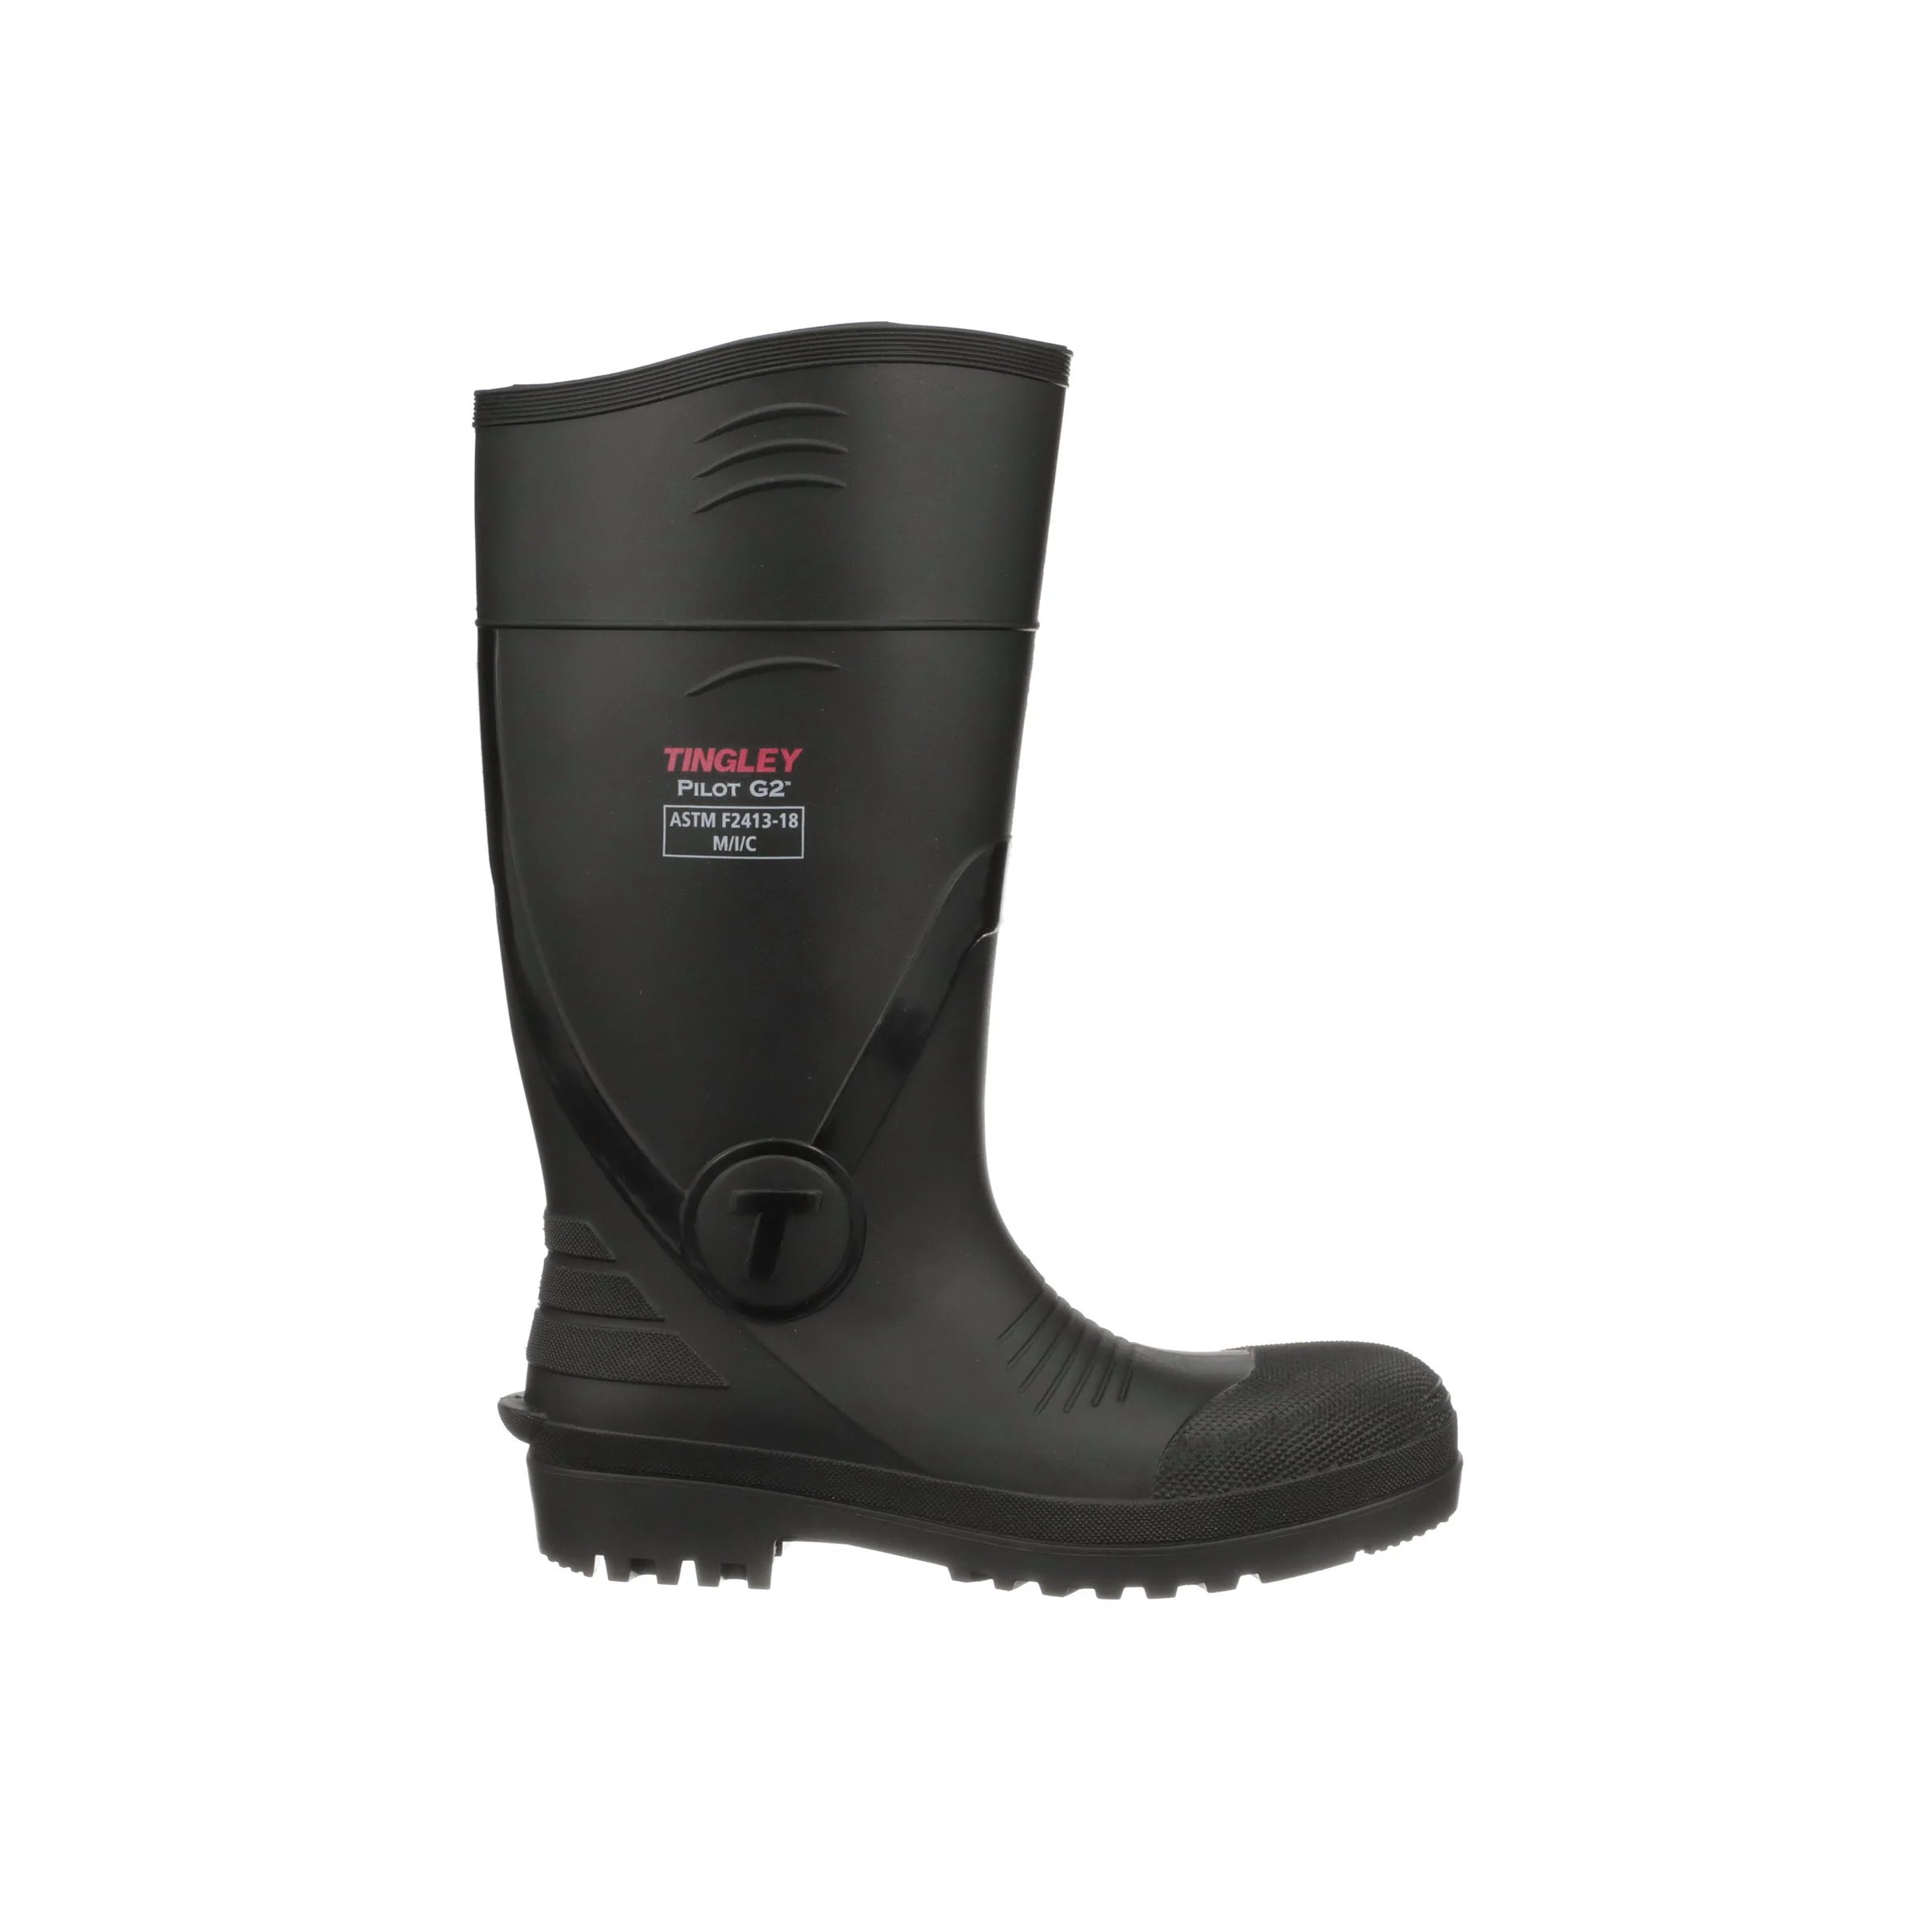 Tingley Pilot G2 15 Inch Knee Rubber Work Boots with Composite Safety Toe from Columbia Safety